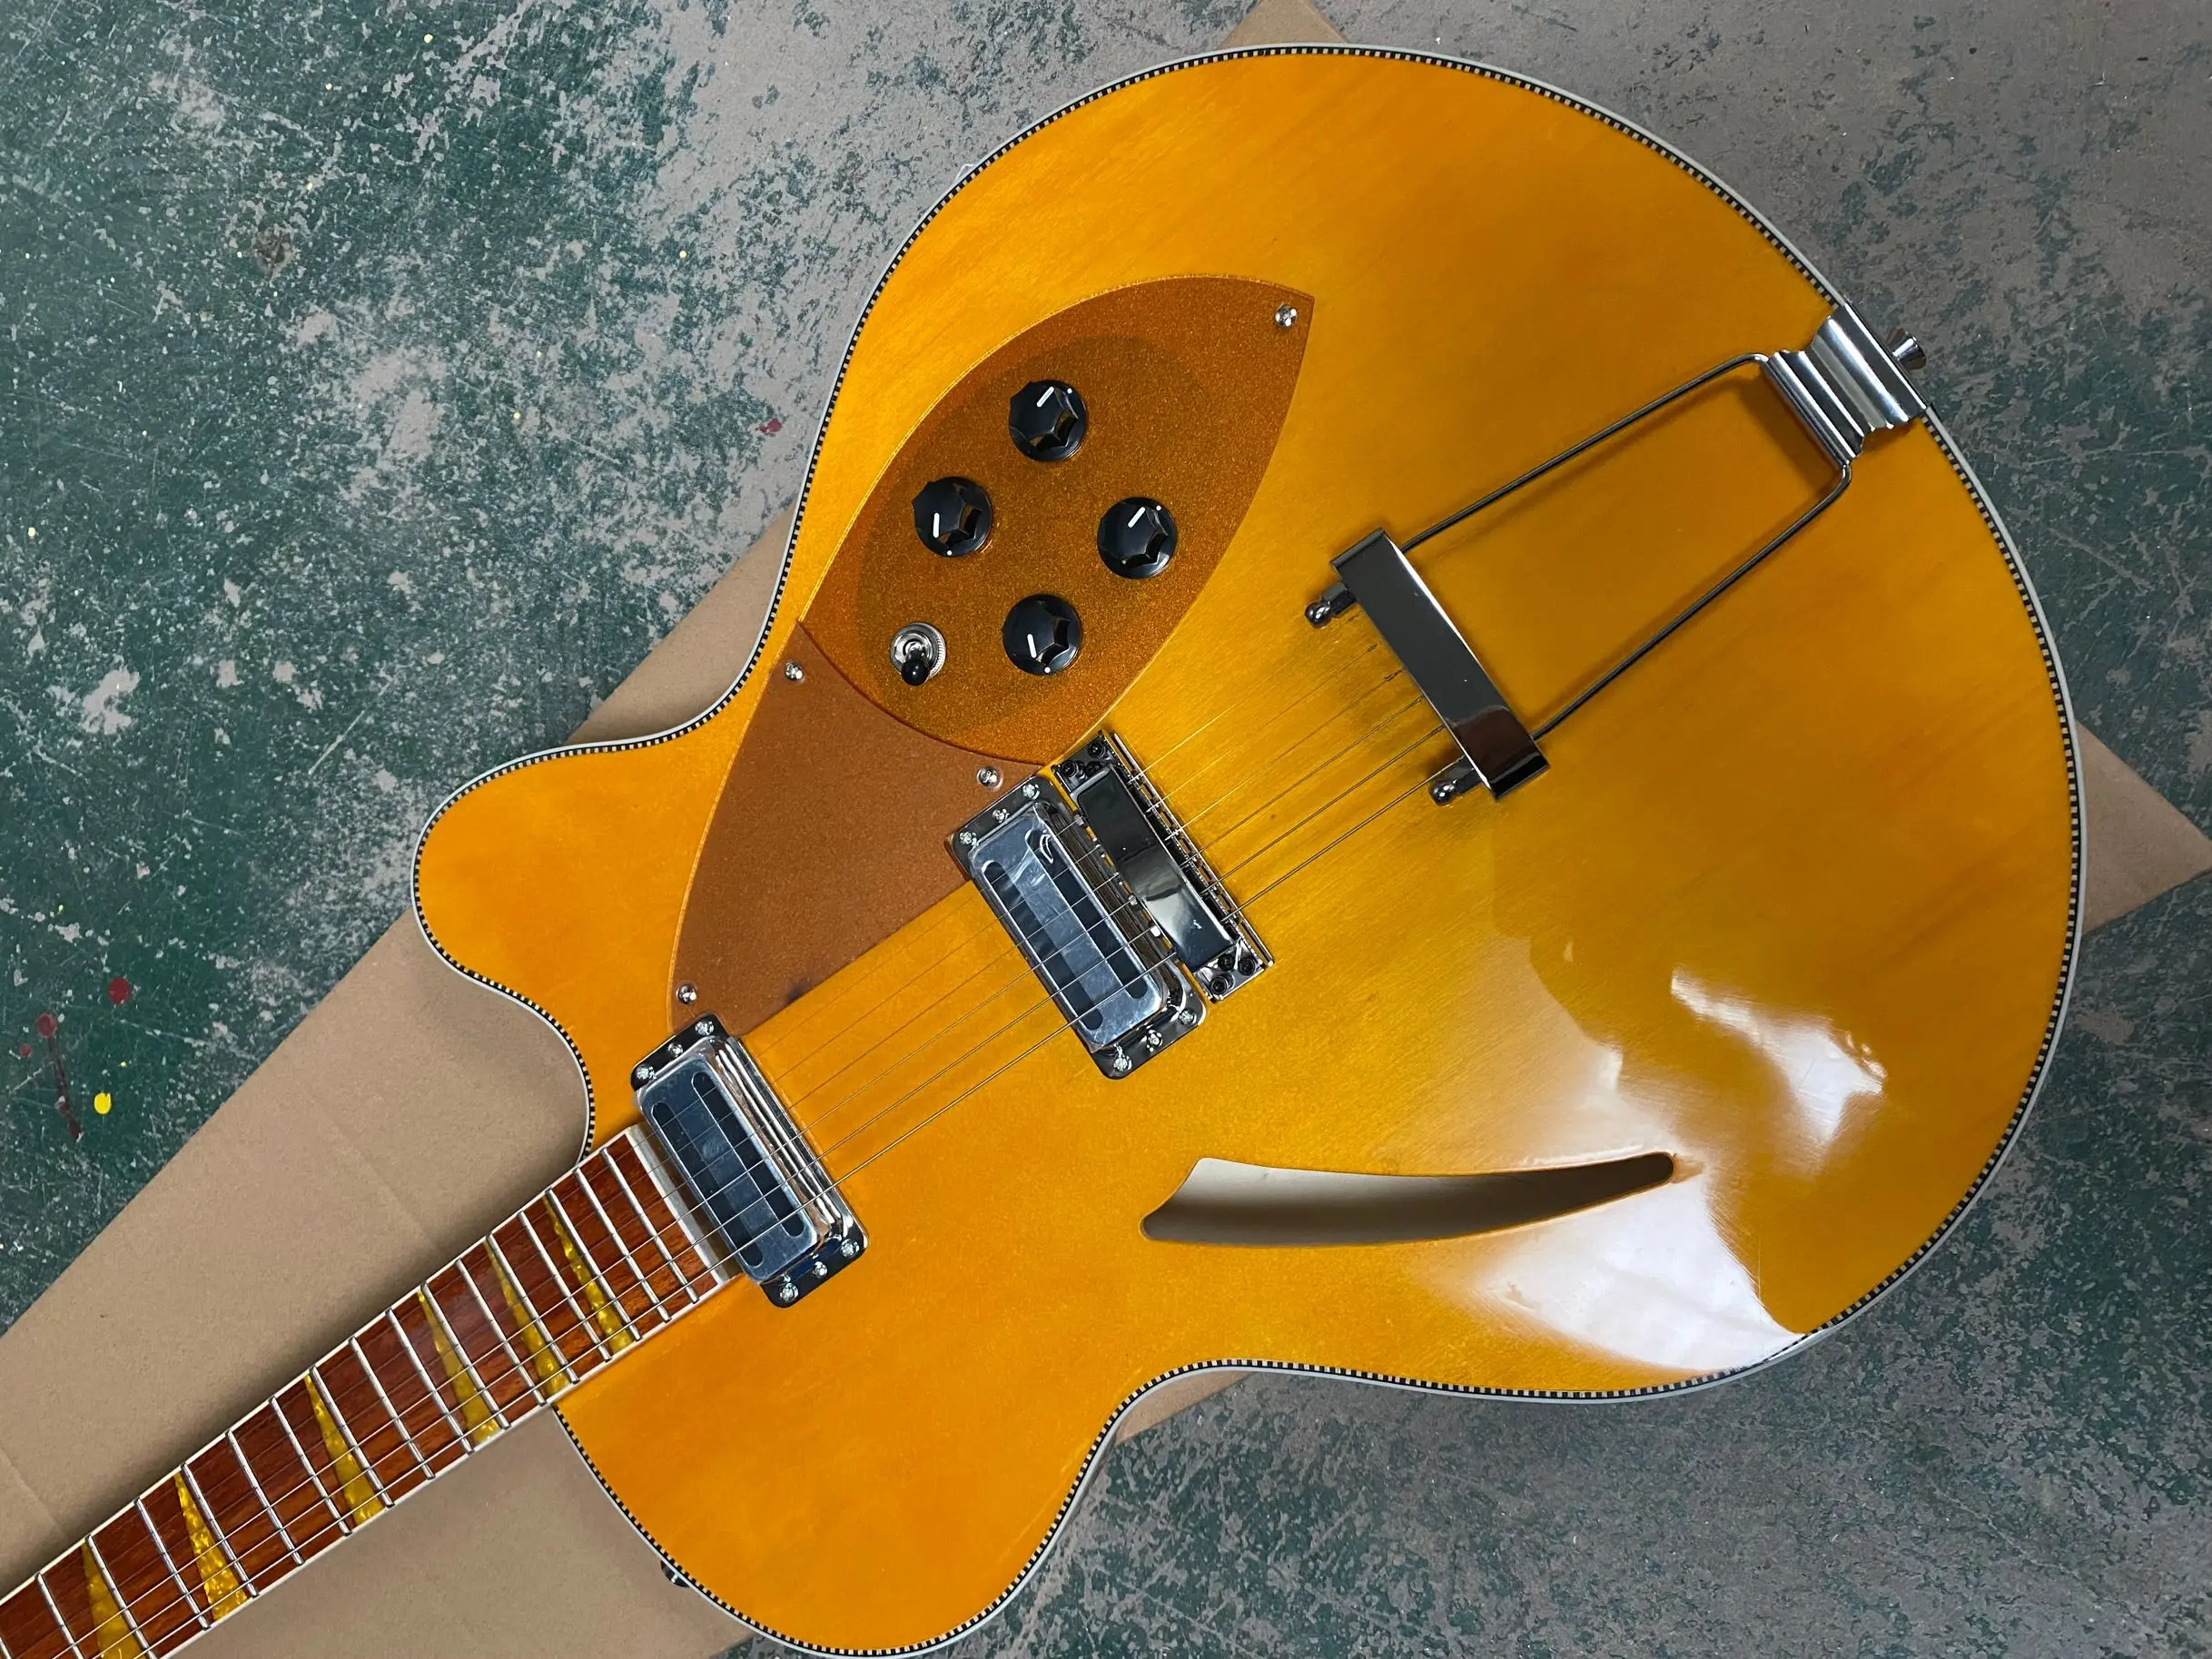 

Custom 6 Strings 360 330 Semi Hollow Body yellow Electric Guitar Single F Hole, Rosewood Fingerboard, Triangle Inlay, Five Knobs